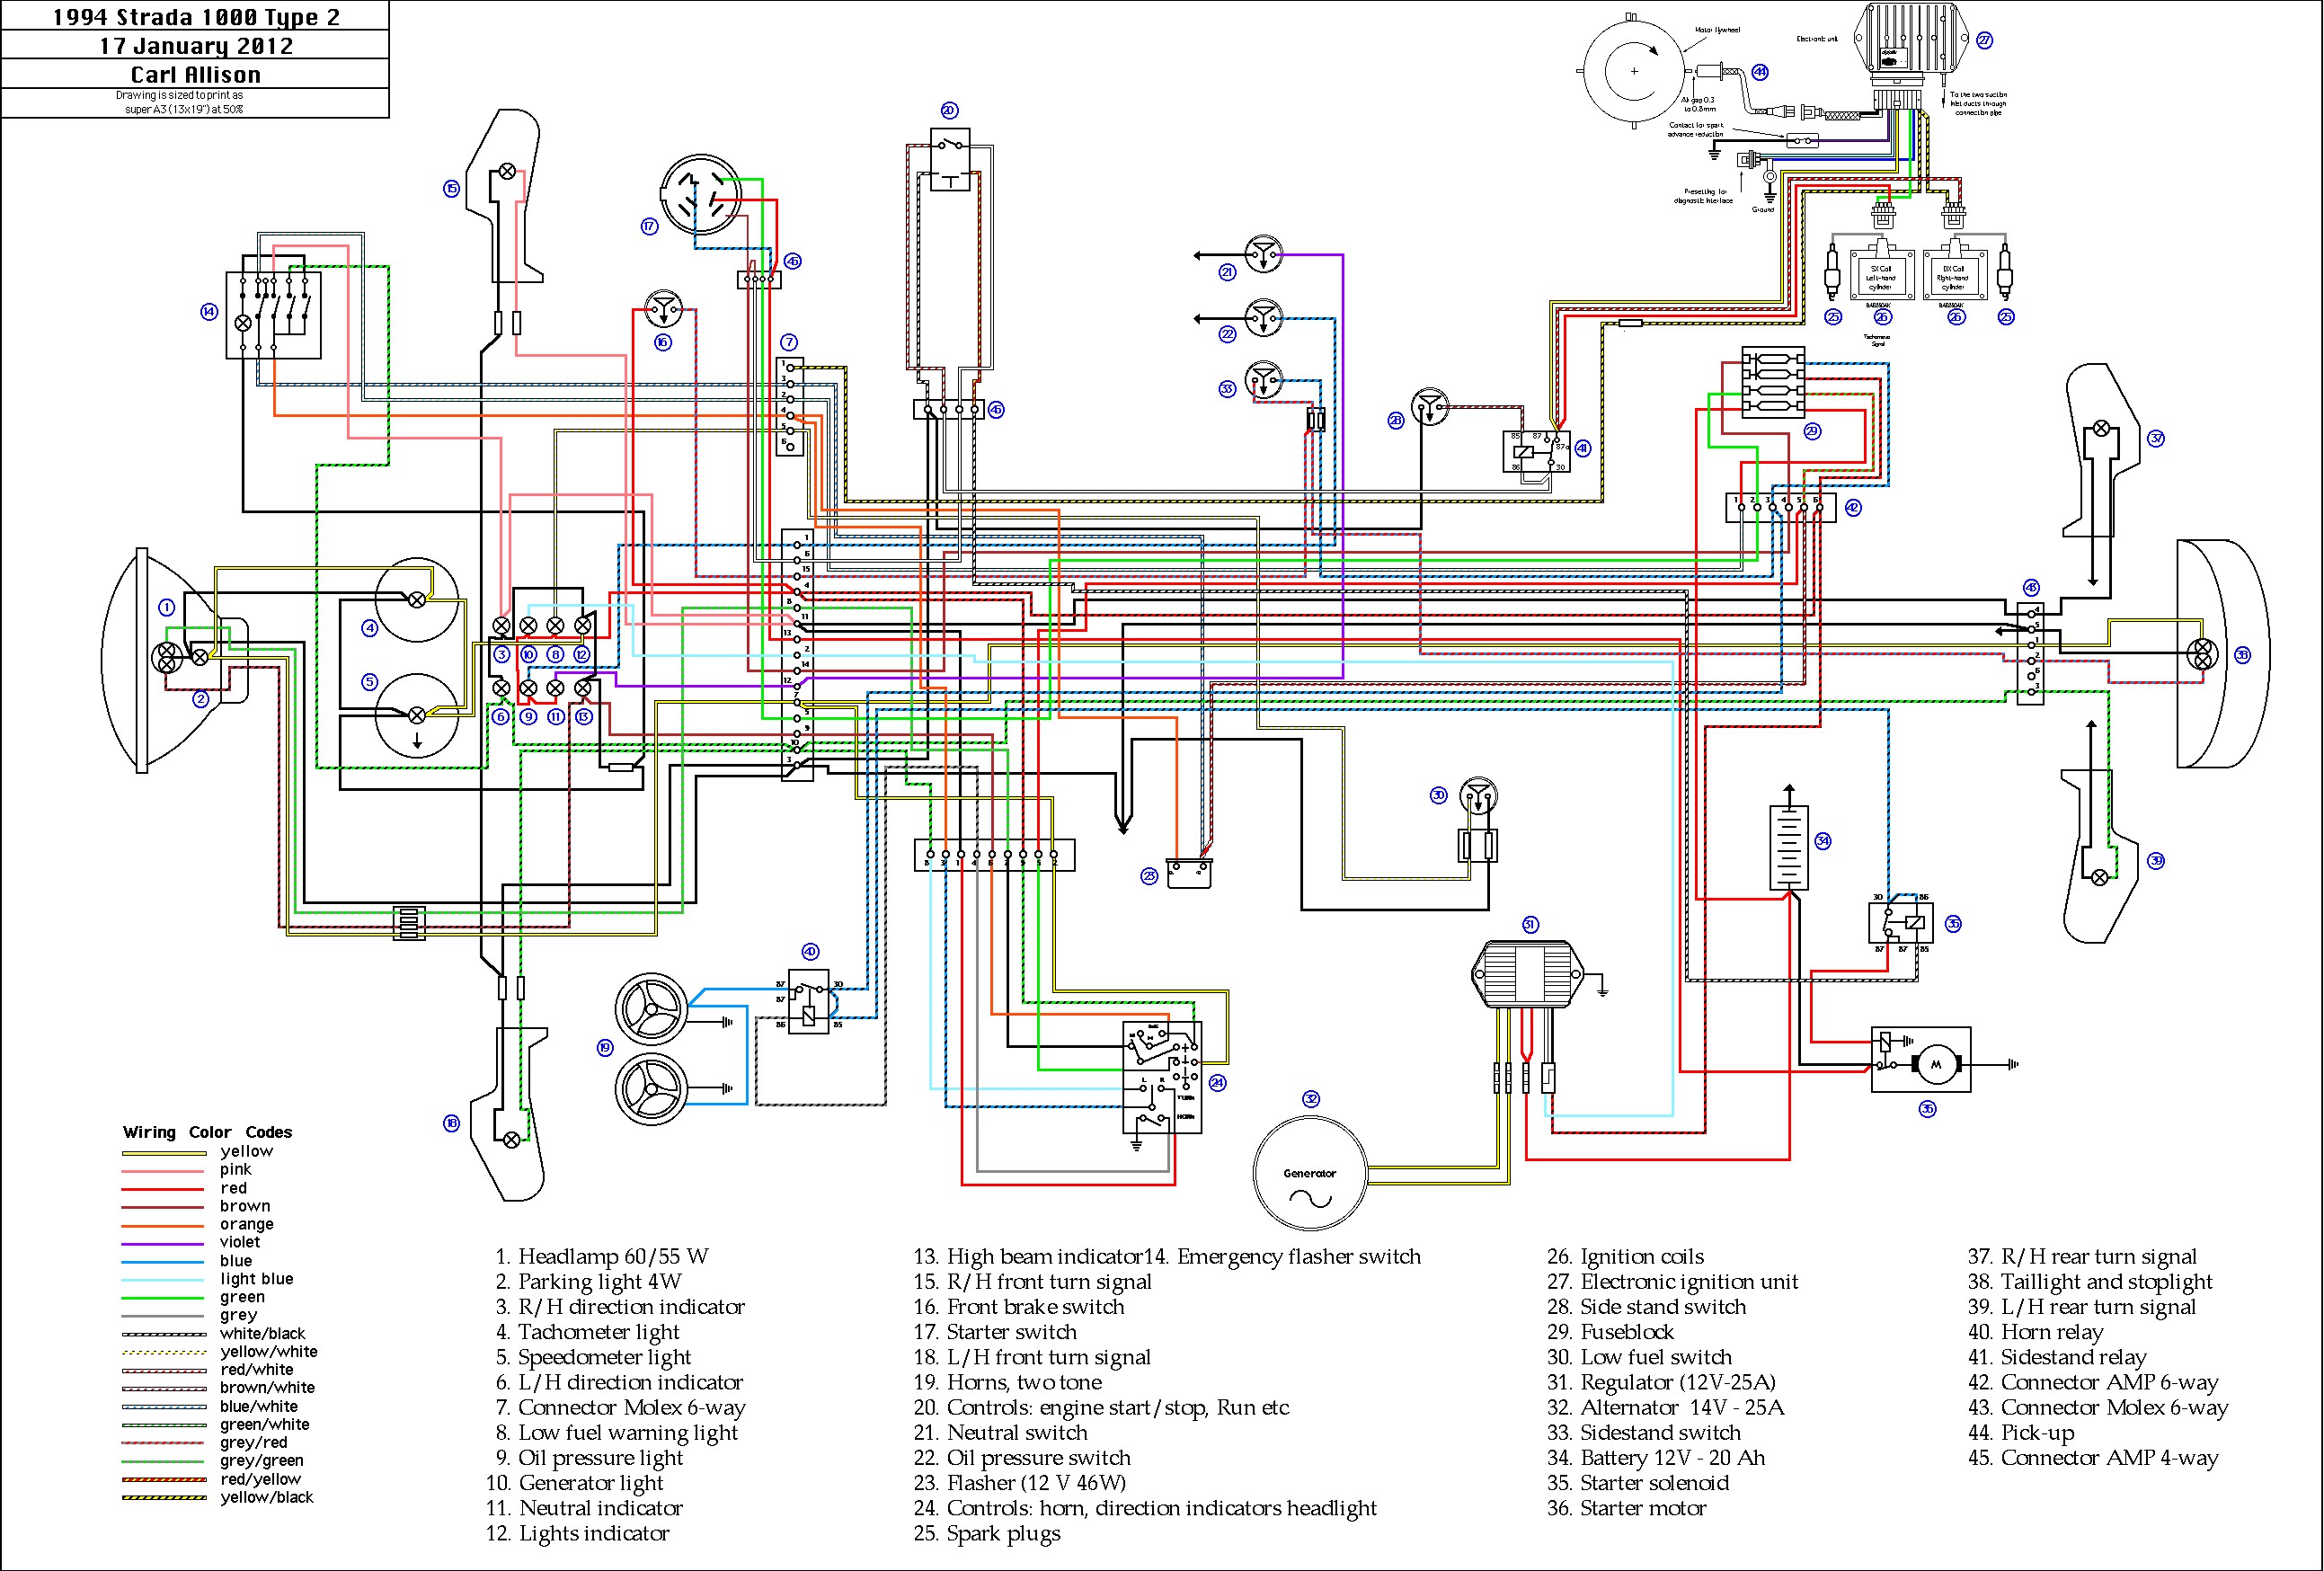 Corsa Engine Diagram Vauxhall Bo Wiring Diagram Pdf Along with Opel astra Wiring Of Corsa Engine Diagram